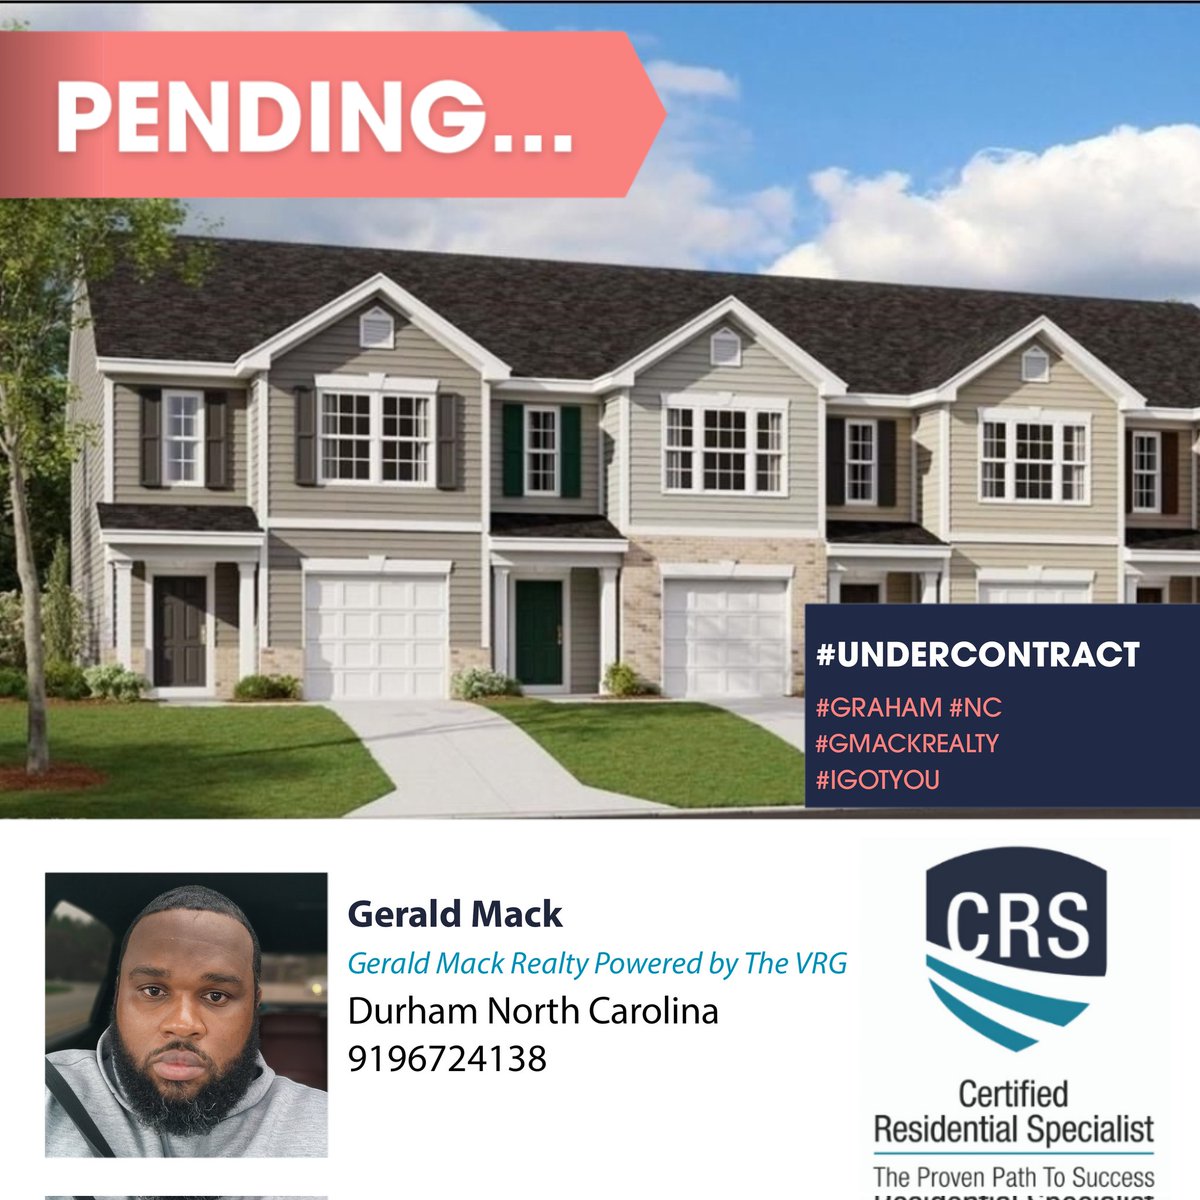 Clients: 'Gerald, we need a new townhome close to my teaching job in Chapel Hill!'

Me: 'I got you❗️❗️❗️'

CertifiedLuxuryHomeMarketingSpecialist #Realtors #realestate #closingday #realestateagent #relocation #househunting #Realty #luxury #locationlocationlocation…